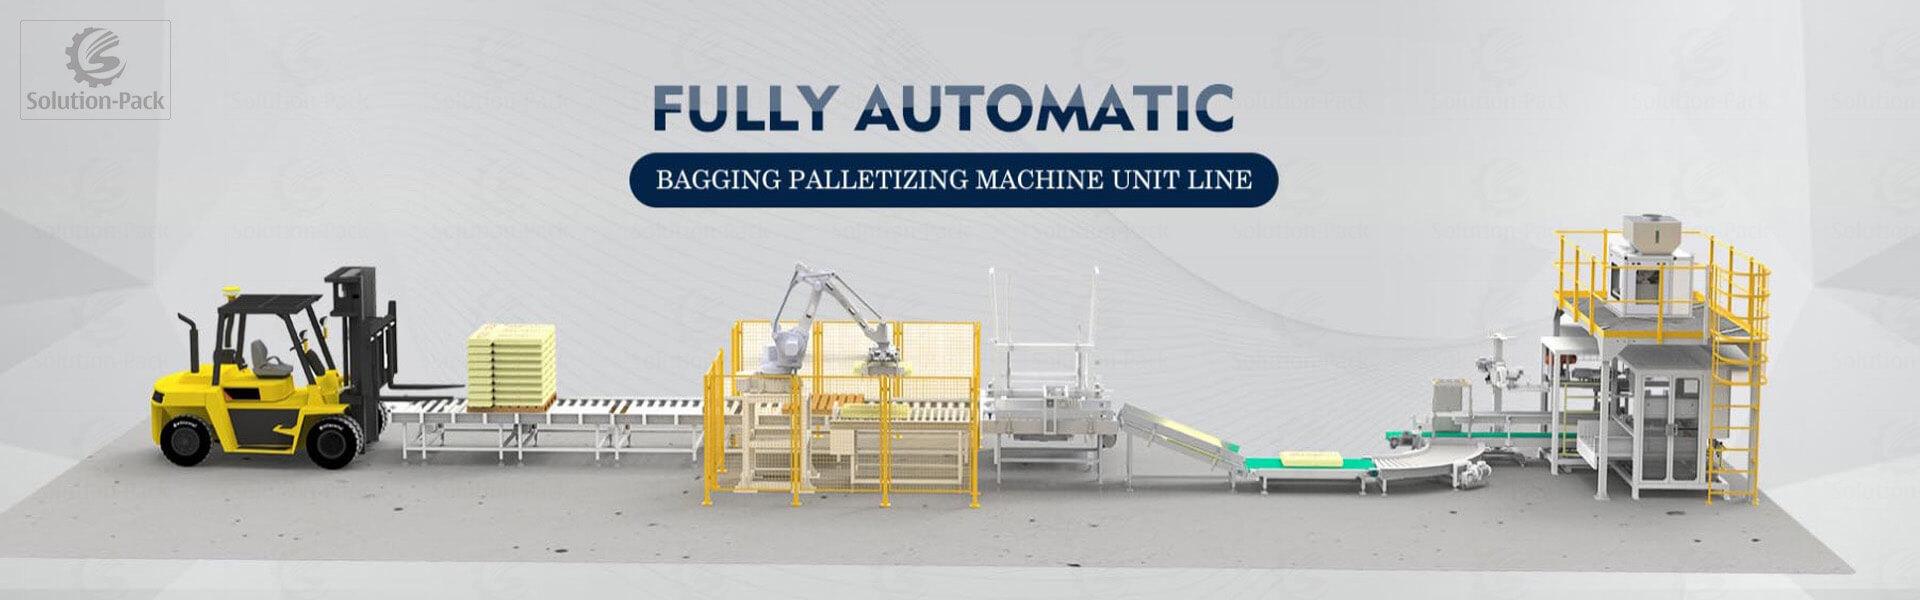 Solution-Pack | Intelligent Industrial Packaging Palletizing Solution Heading Banner Picture | Automatic Bagging Palletizing Machine | Manual Bagging Palletizing Machine | Bagging Machine